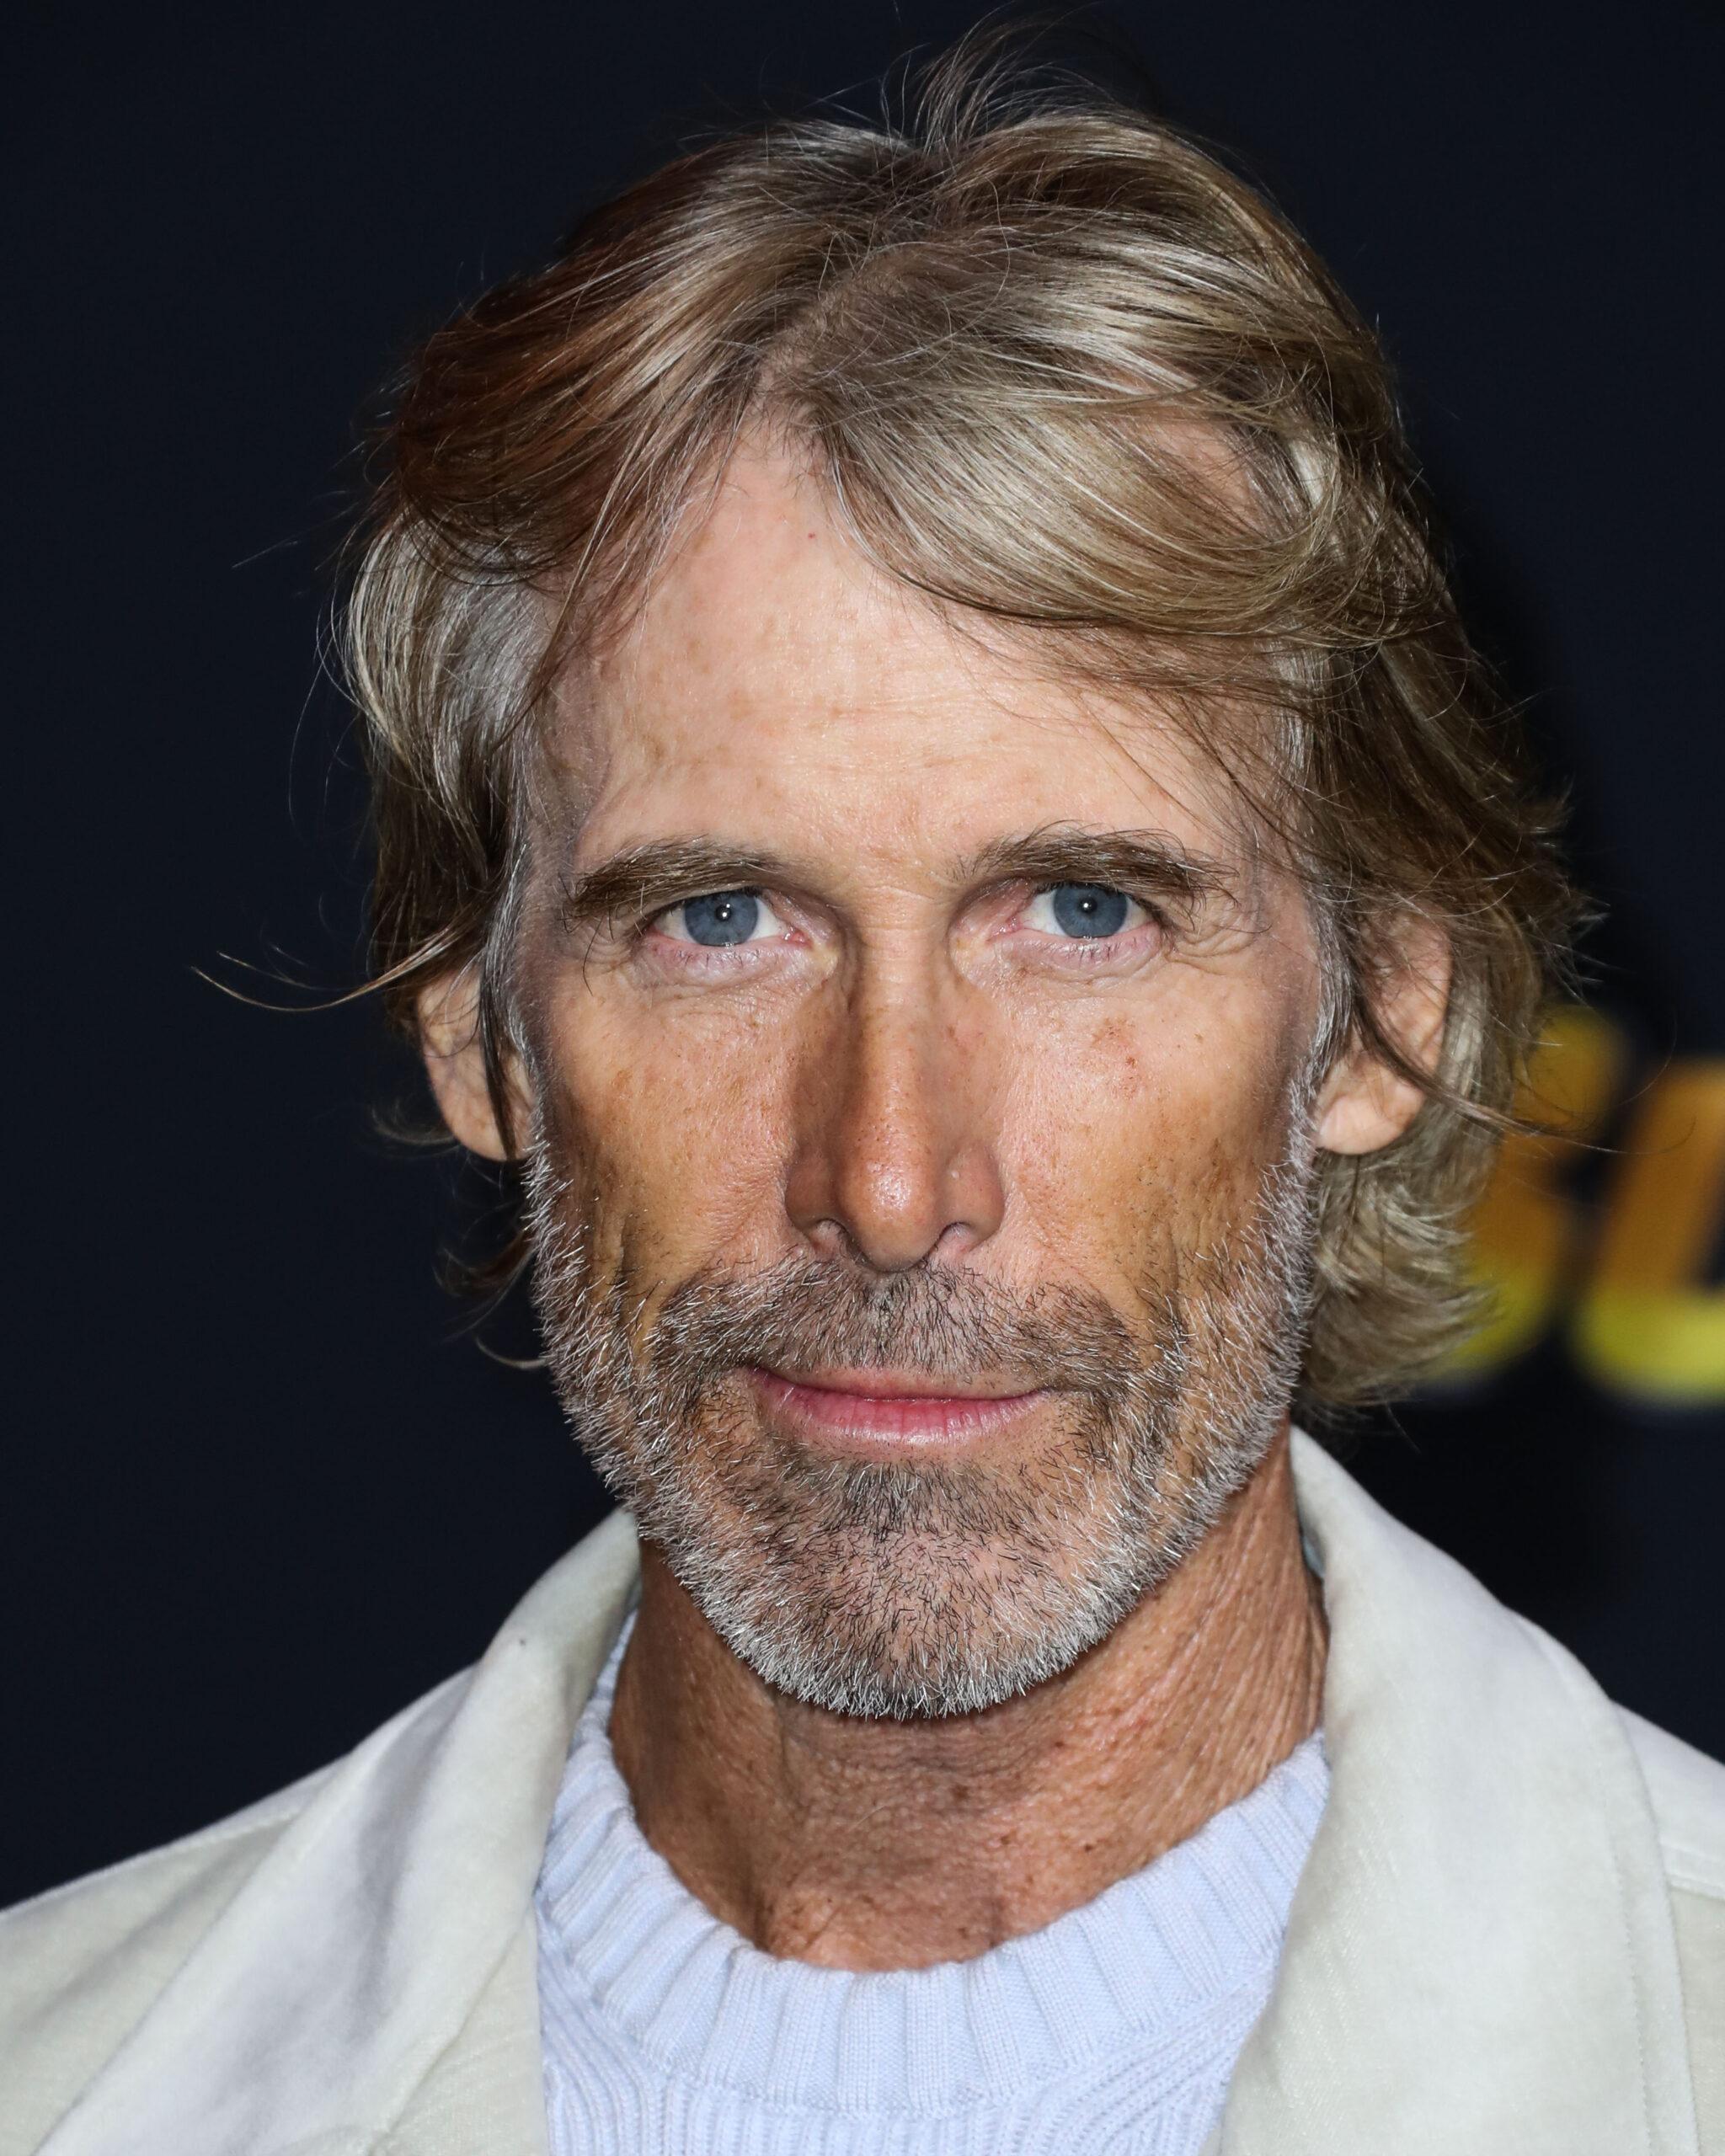 (FILE) Michael Bay To Produce Movie About Coronavirus COVID-19 Pandemic That Will Film During The Pandemic